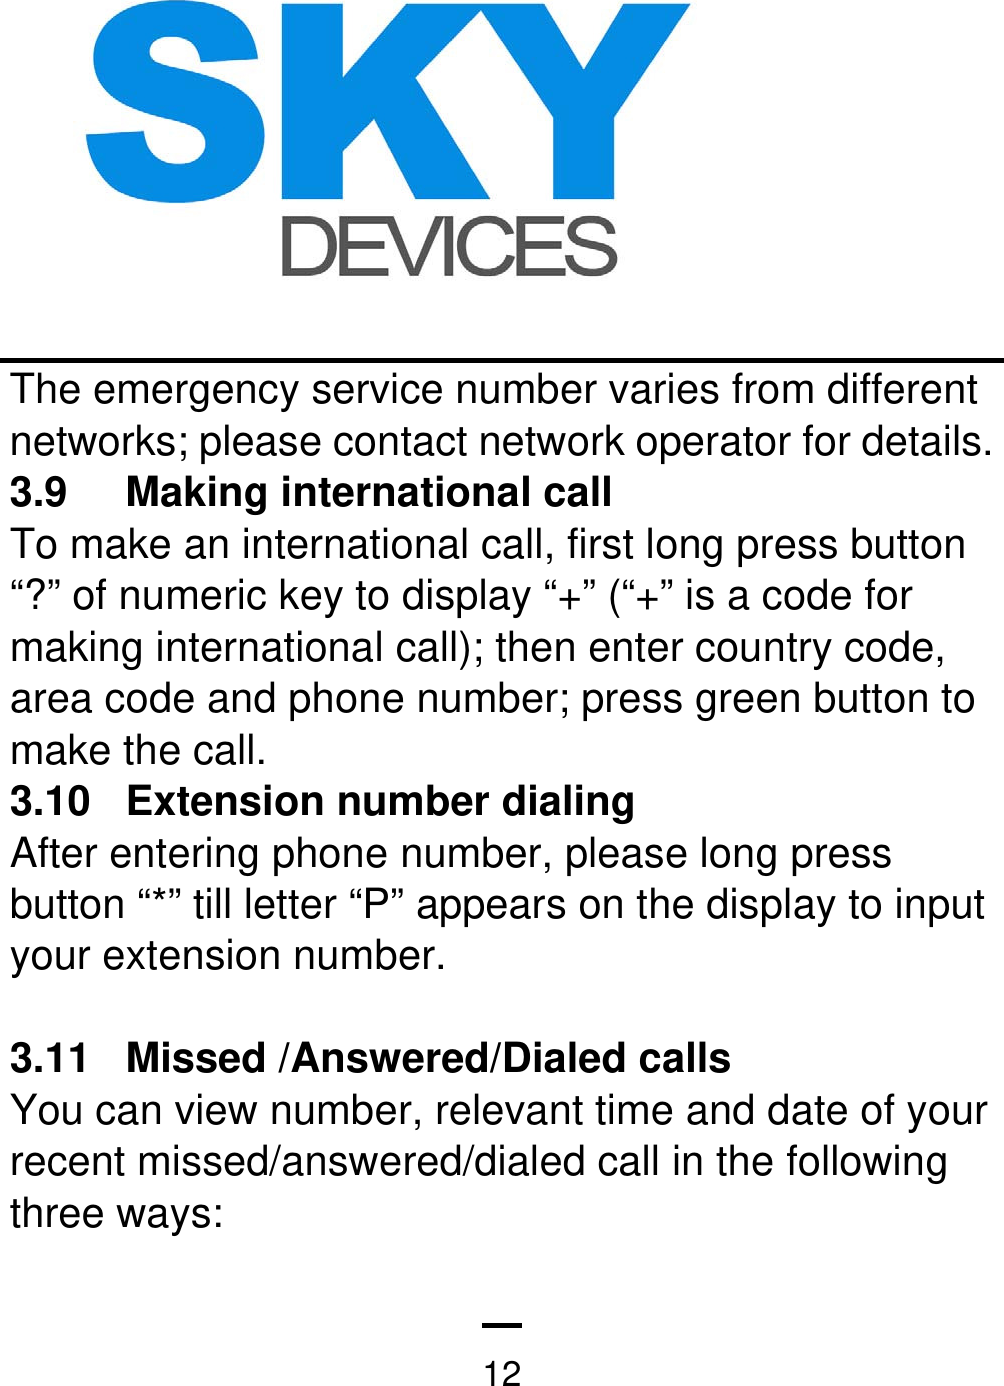   12The emergency service number varies from different networks; please contact network operator for details.     3.9 Making international call To make an international call, first long press button “?” of numeric key to display “+” (“+” is a code for making international call); then enter country code, area code and phone number; press green button to make the call.   3.10 Extension number dialing  After entering phone number, please long press button “*” till letter “P” appears on the display to input your extension number.  3.11  Missed /Answered/Dialed calls You can view number, relevant time and date of your recent missed/answered/dialed call in the following three ways: 